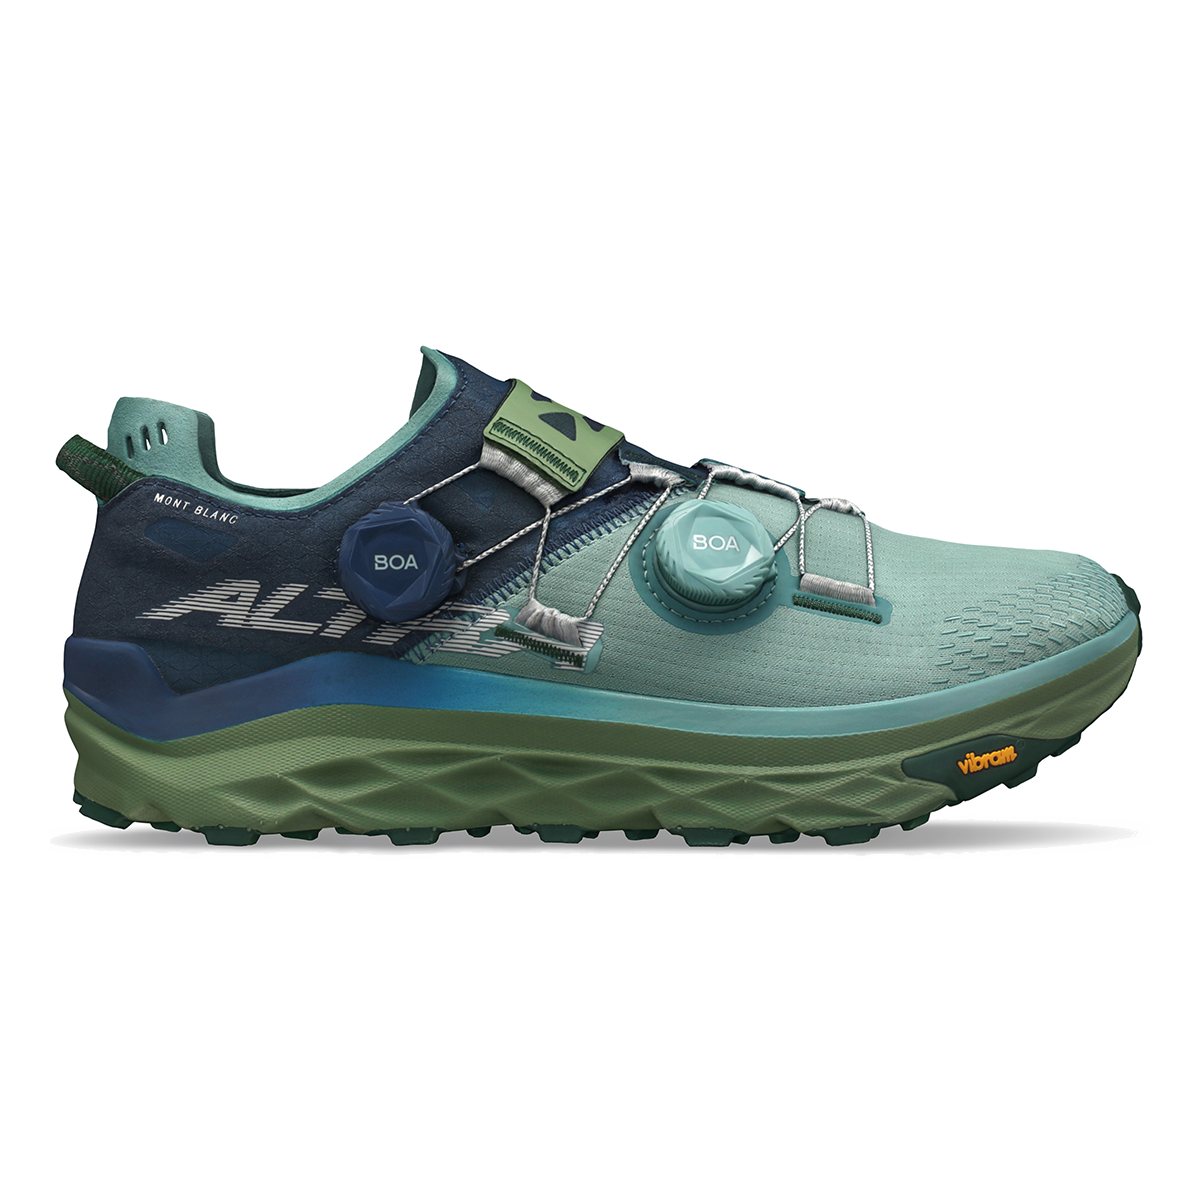 Altra Mont Blanc BOA, , large image number null